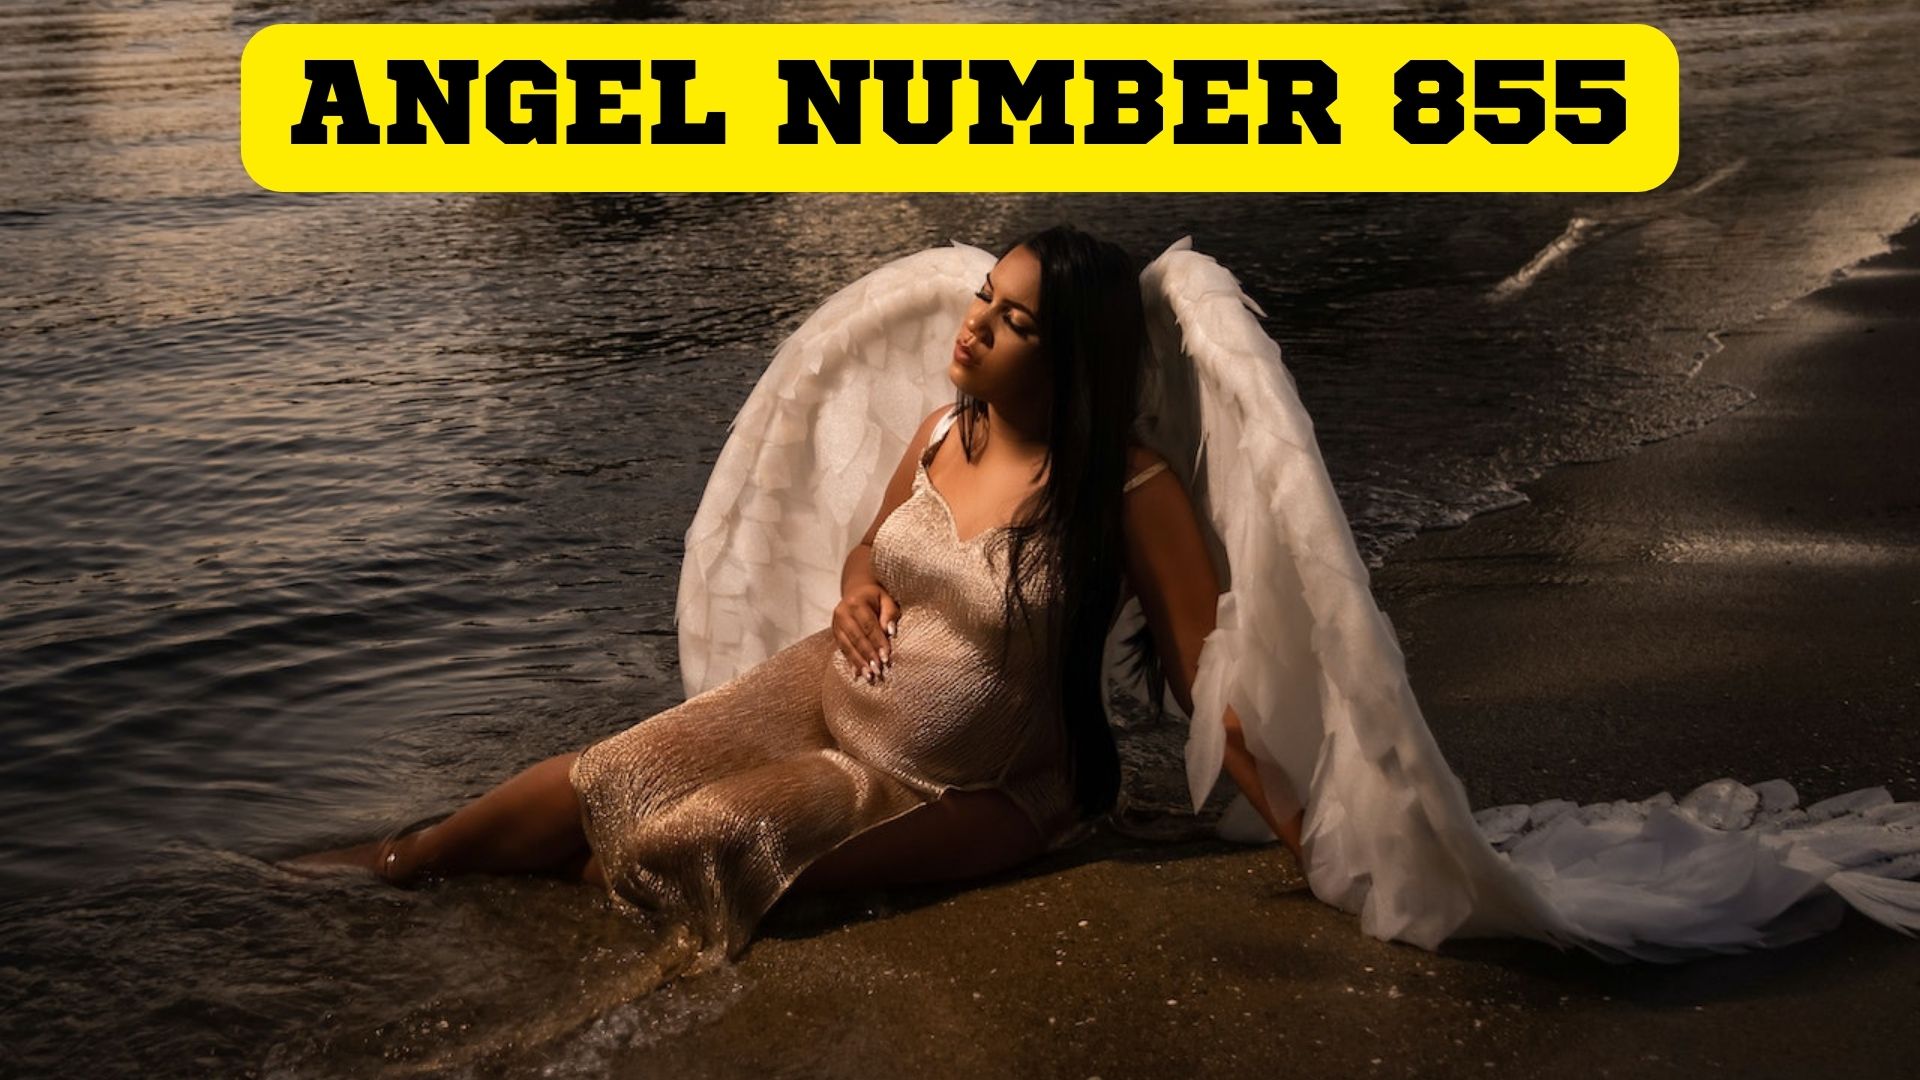 Angel Number 855 Symbolizes Karmic Choices And Decisions